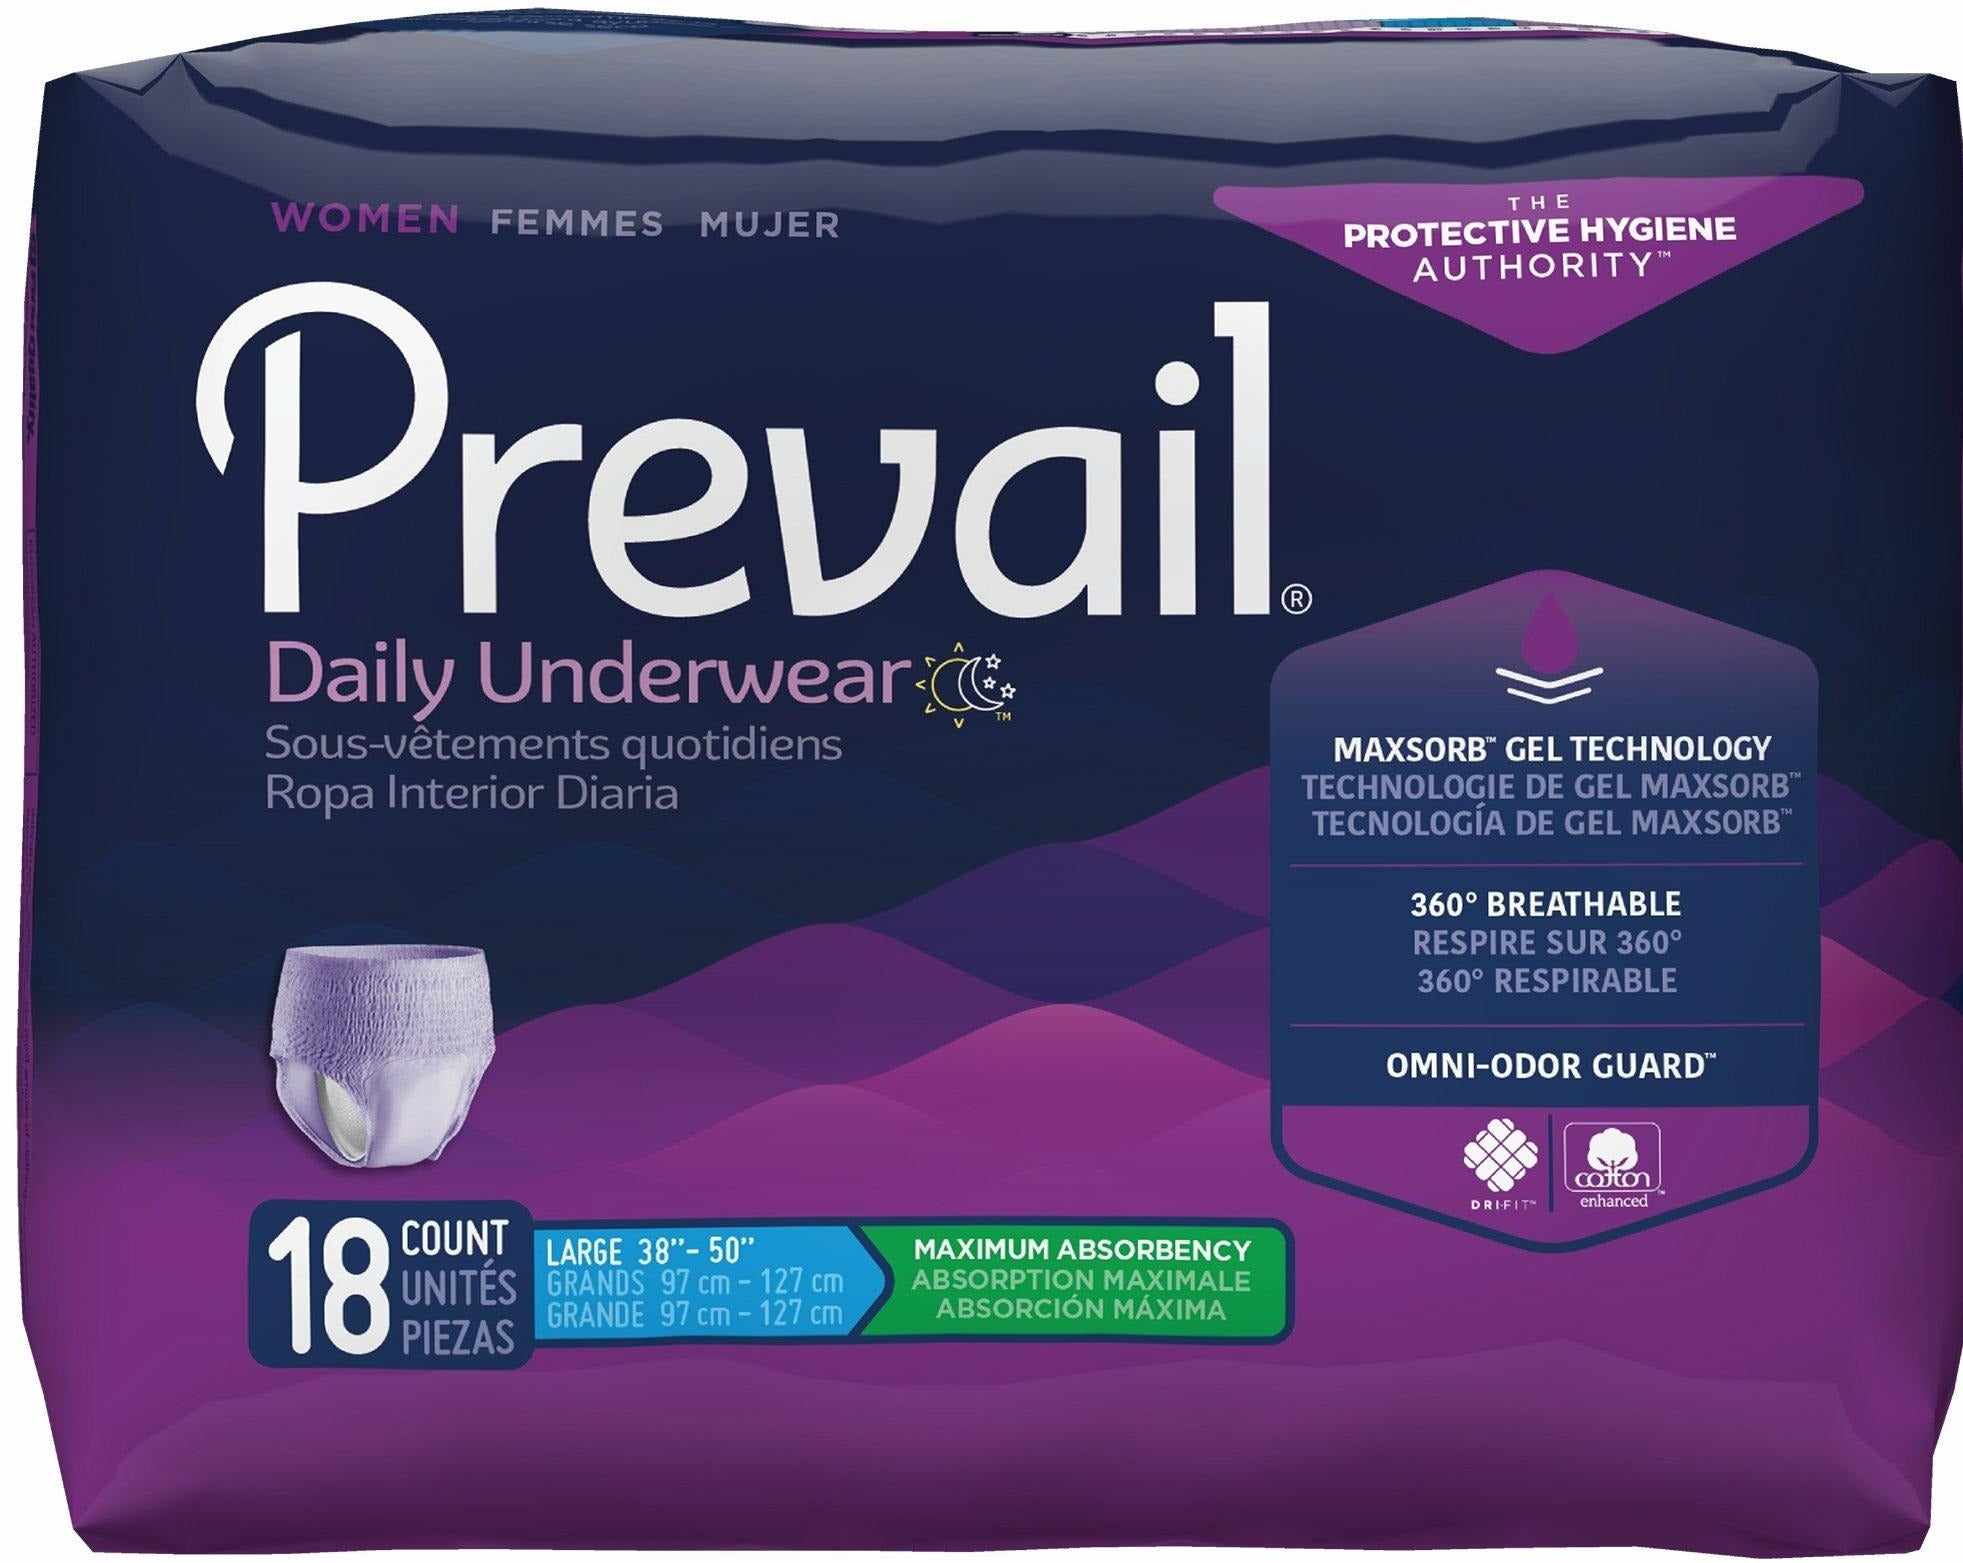 Prevail Air Overnight Heavy Absorbency Incontinence Brief